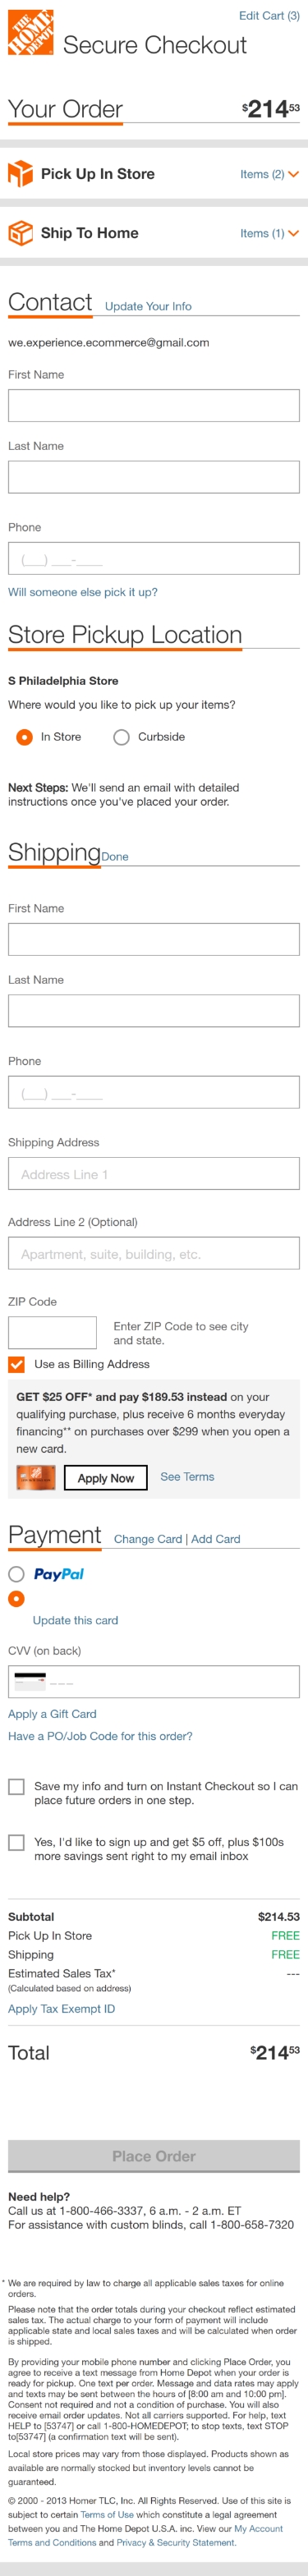 homedepot checkout page mobile